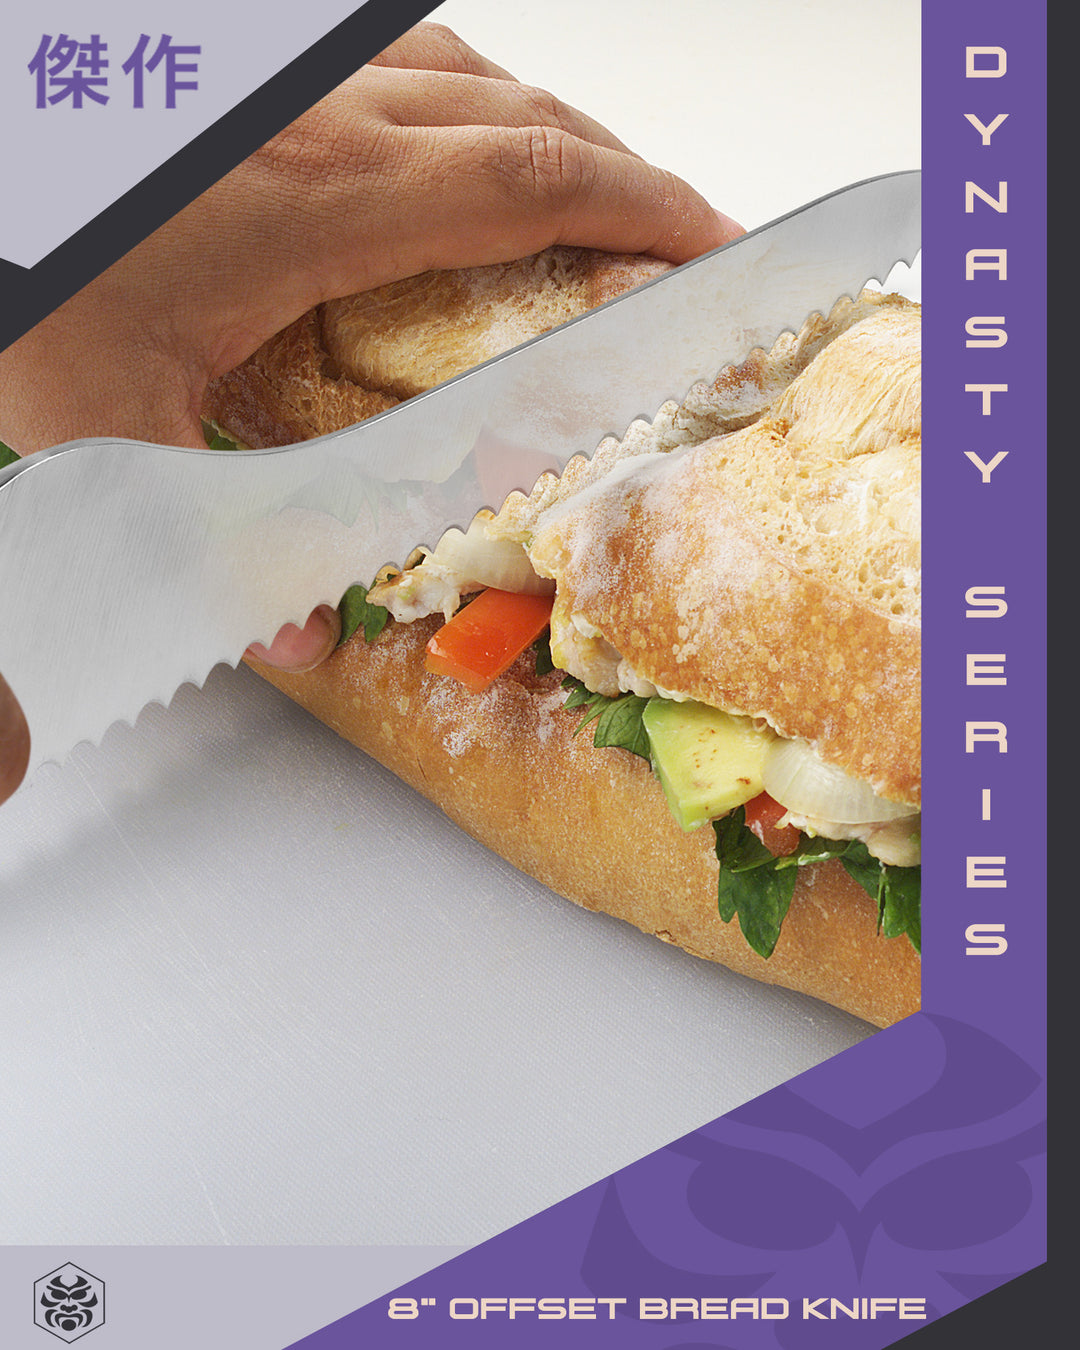 A man cut a large sub sandwich with the Dynasty Offset Deli Knife